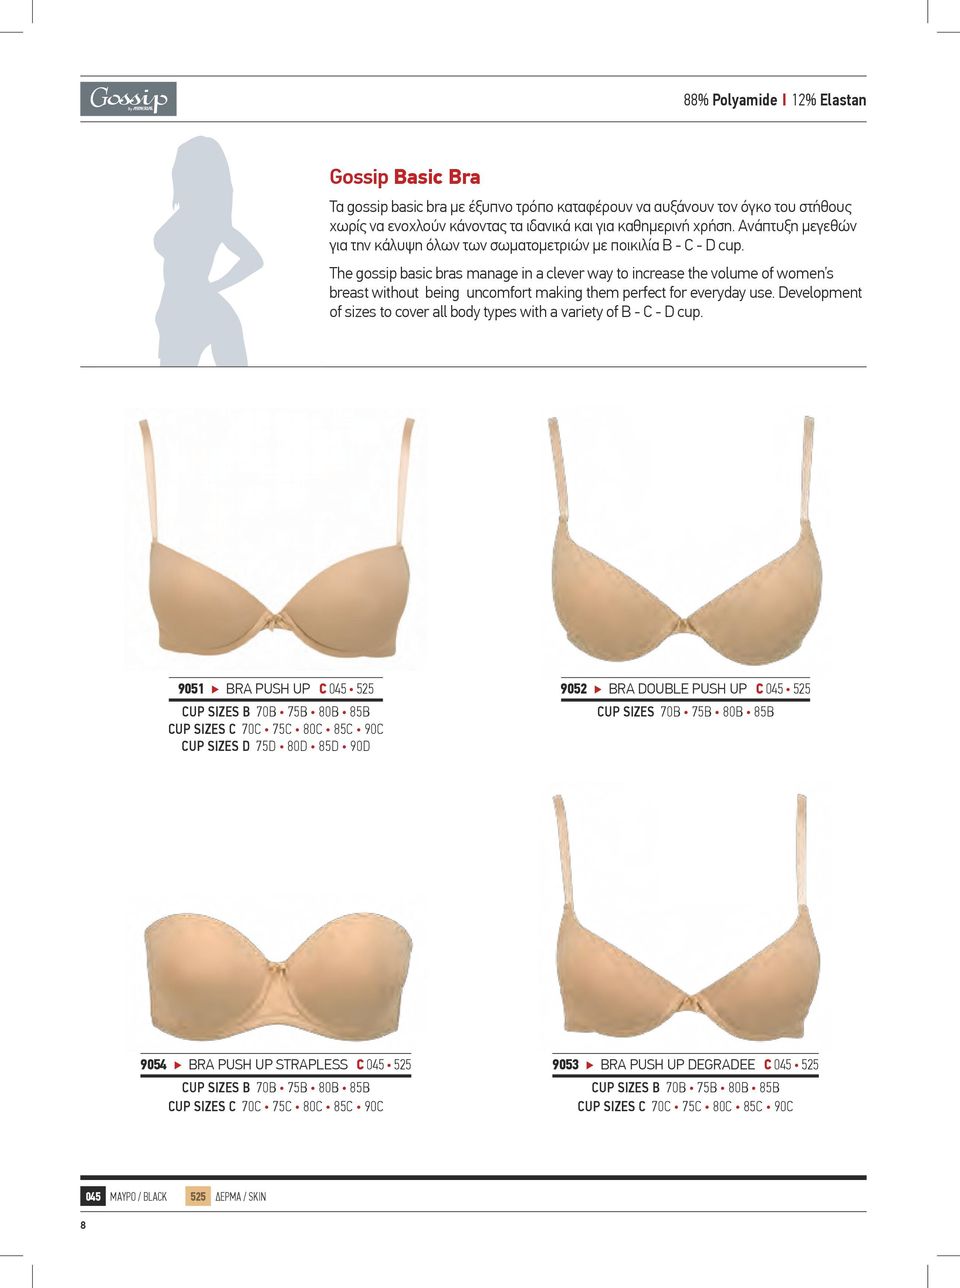 The gossip basic bras manage in a clever way to increase the volume of women s breast without being uncomfort making them perfect for everyday use.